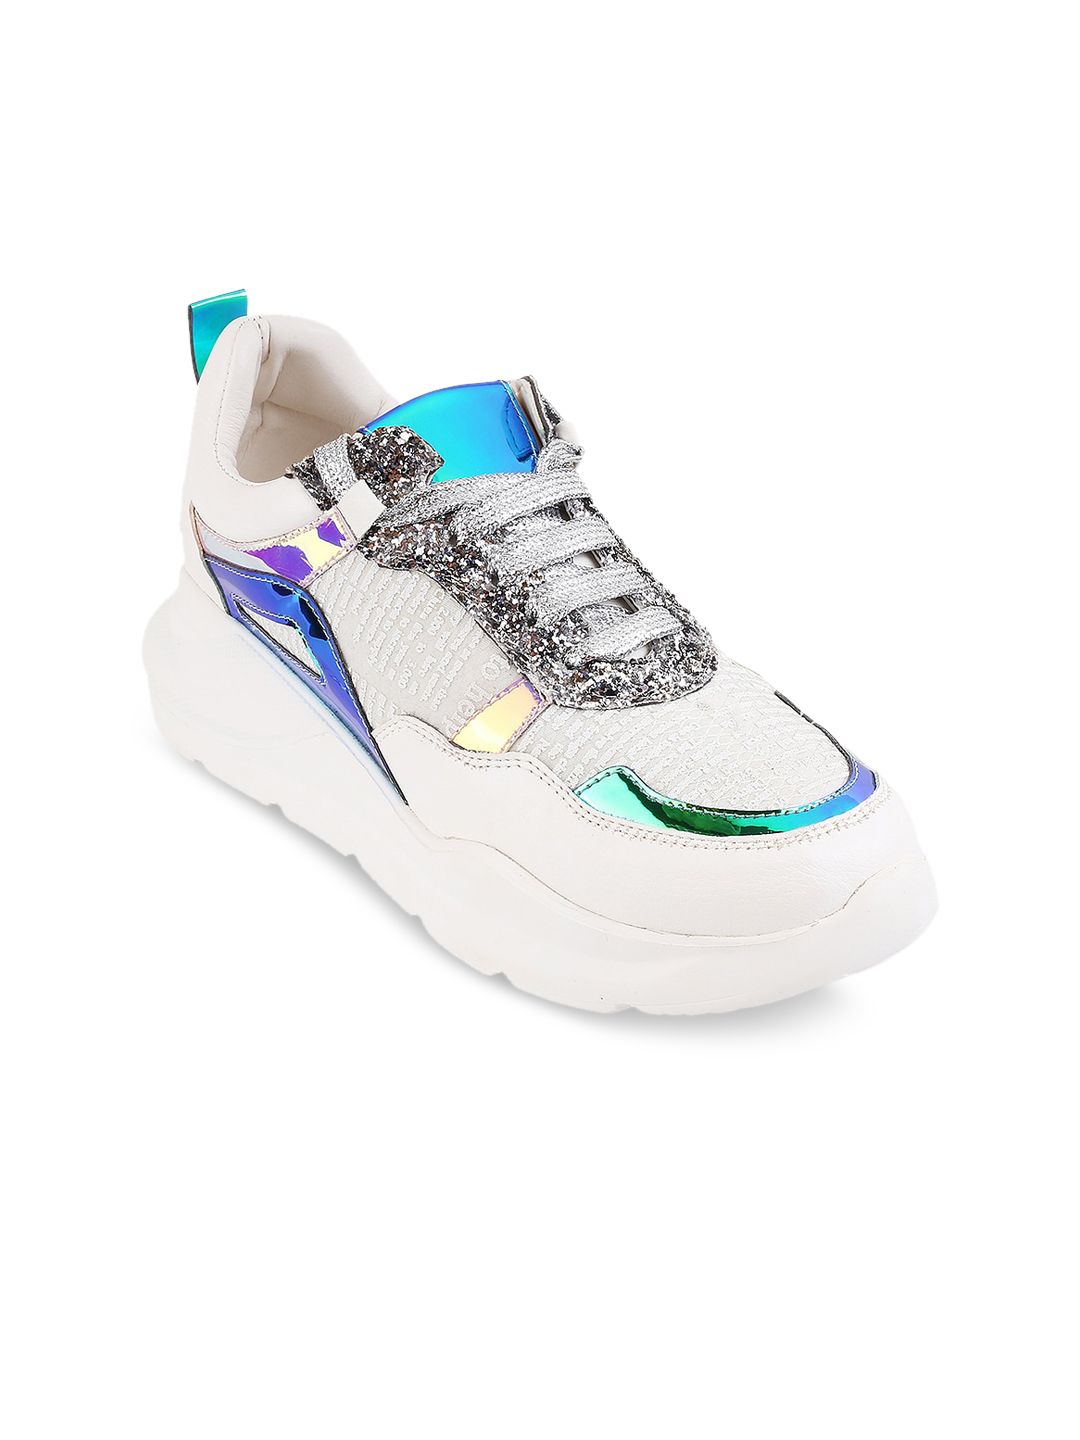 Catwalk Women White & Silver-Toned Colourblocked Sneakers Price in India